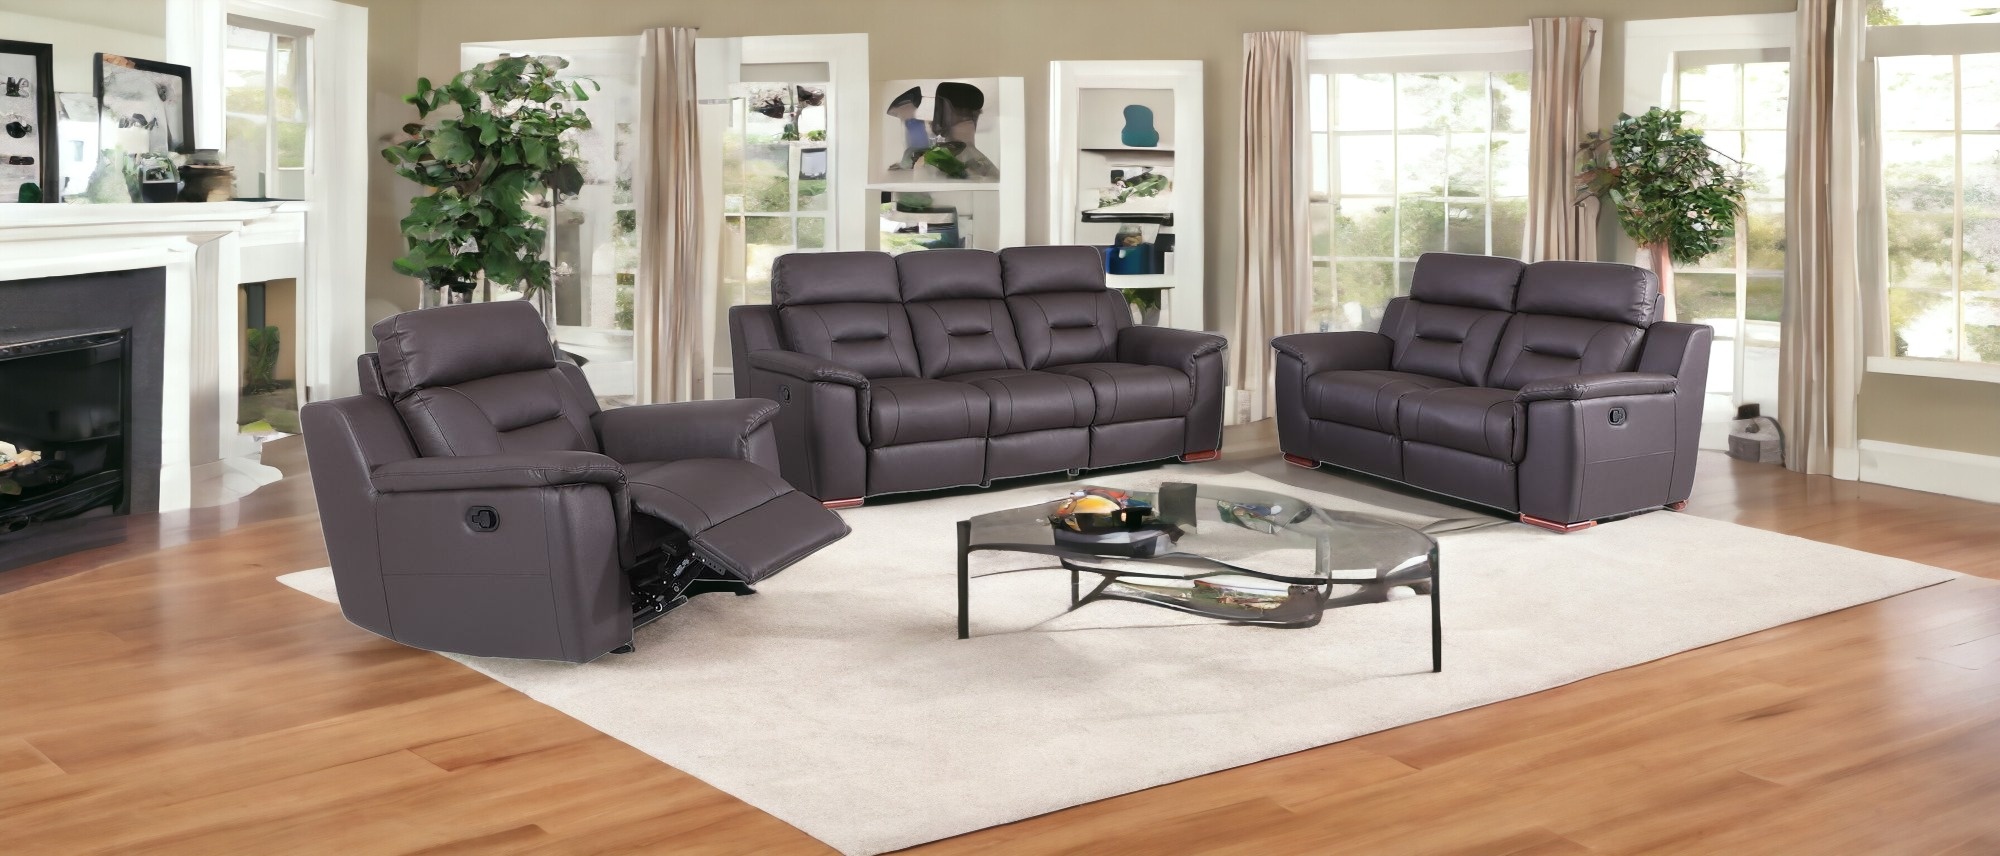 Three Piece Indoor Brown Genuine Leather Five Person Seating Set-366194-1